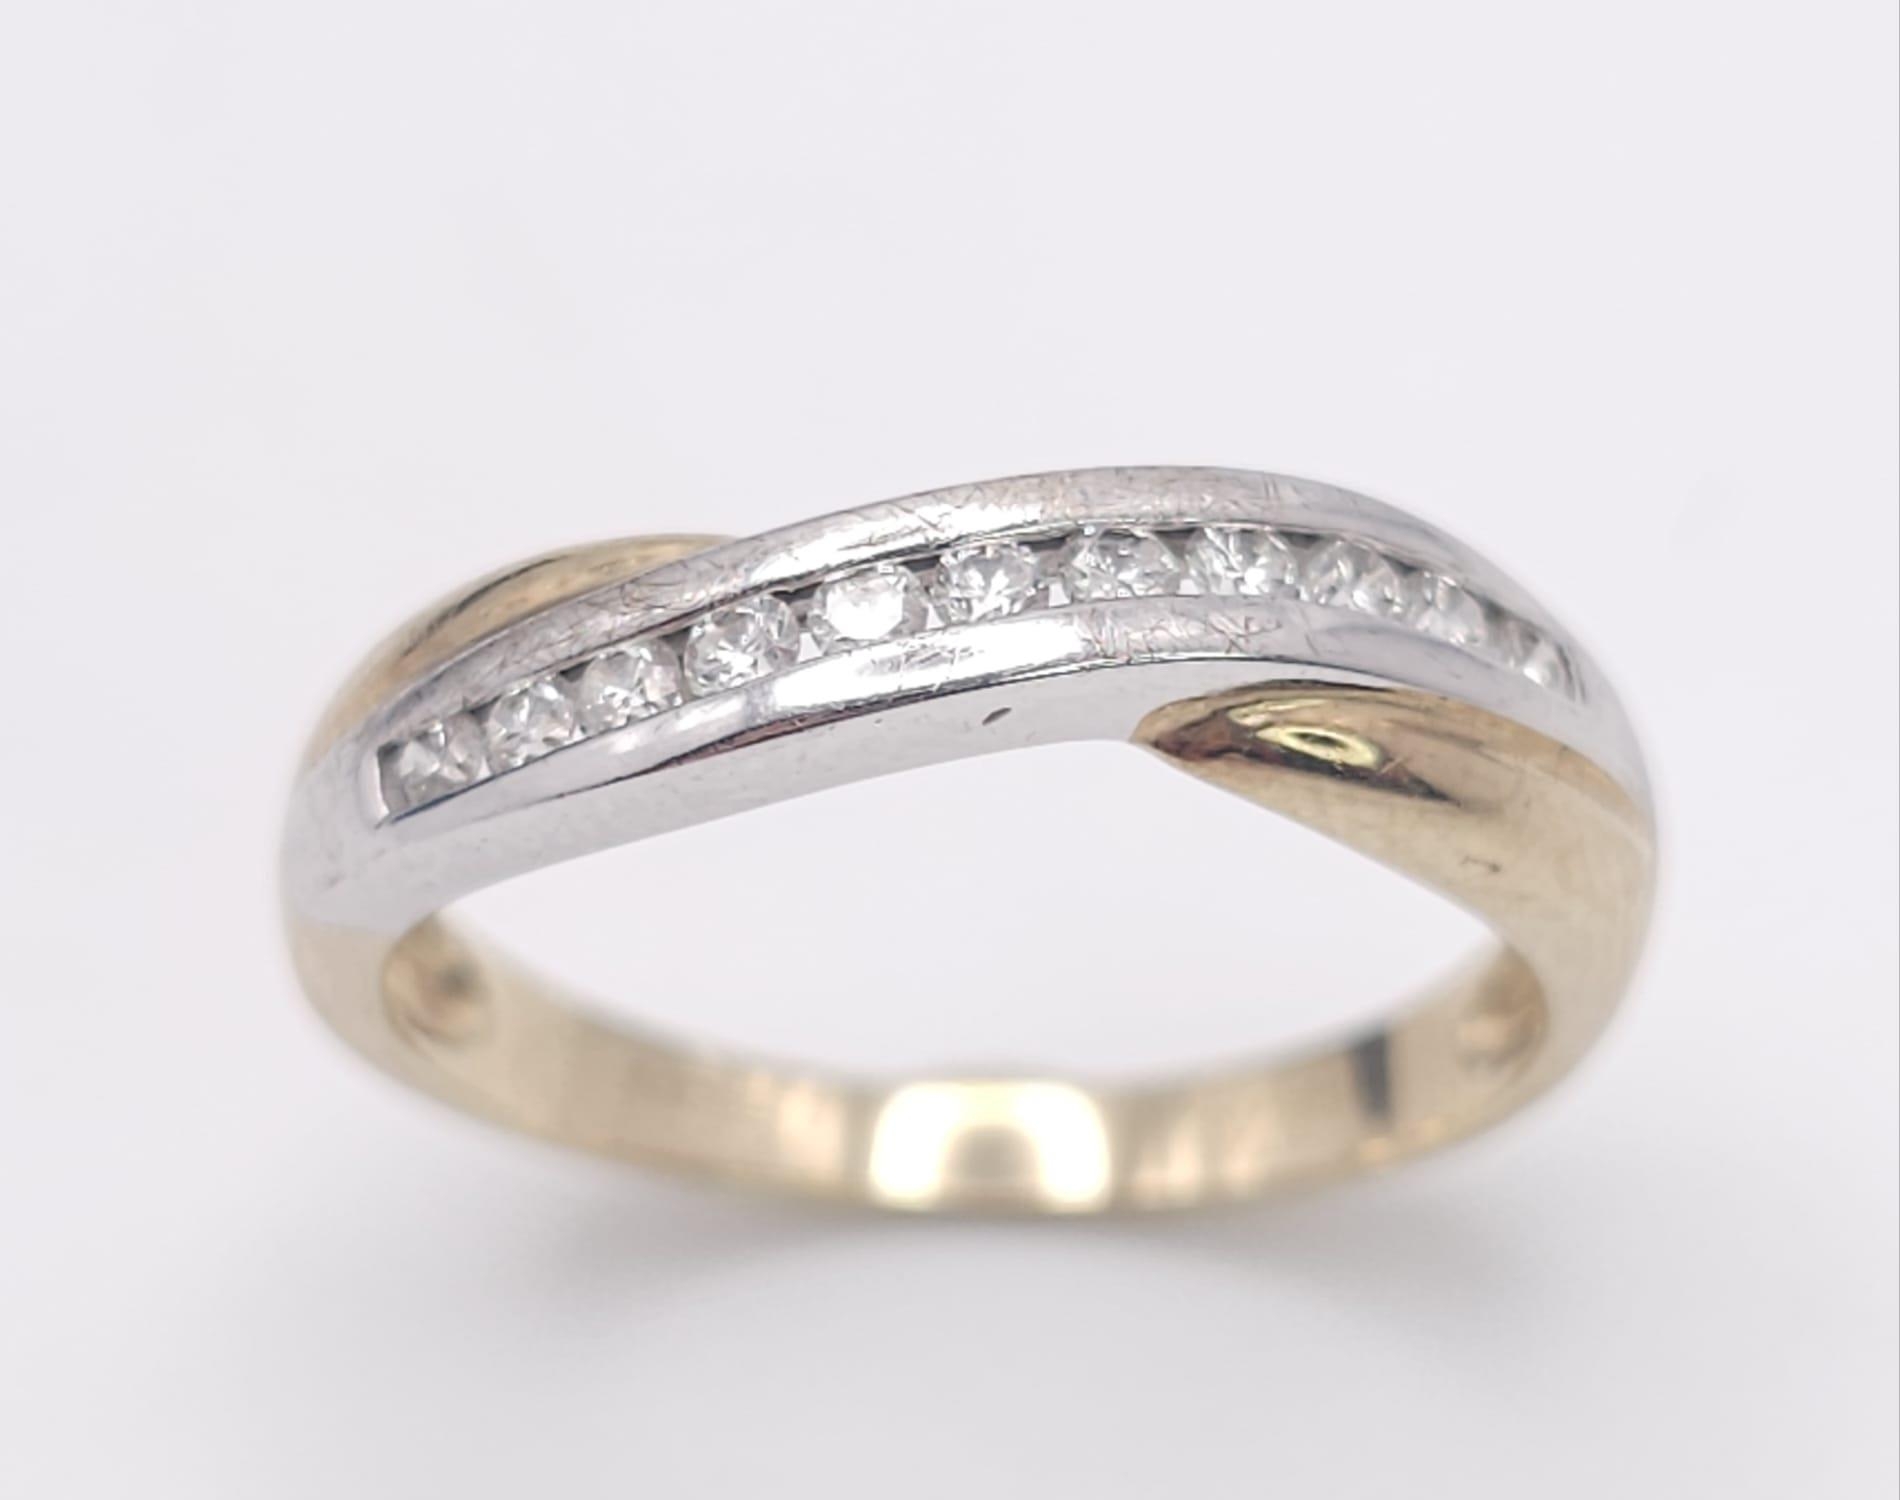 A 9K Yellow Gold and Diamond Half-Eternity Ring. 0.22ctw. 2.3g total weight. Size P. - Image 2 of 7